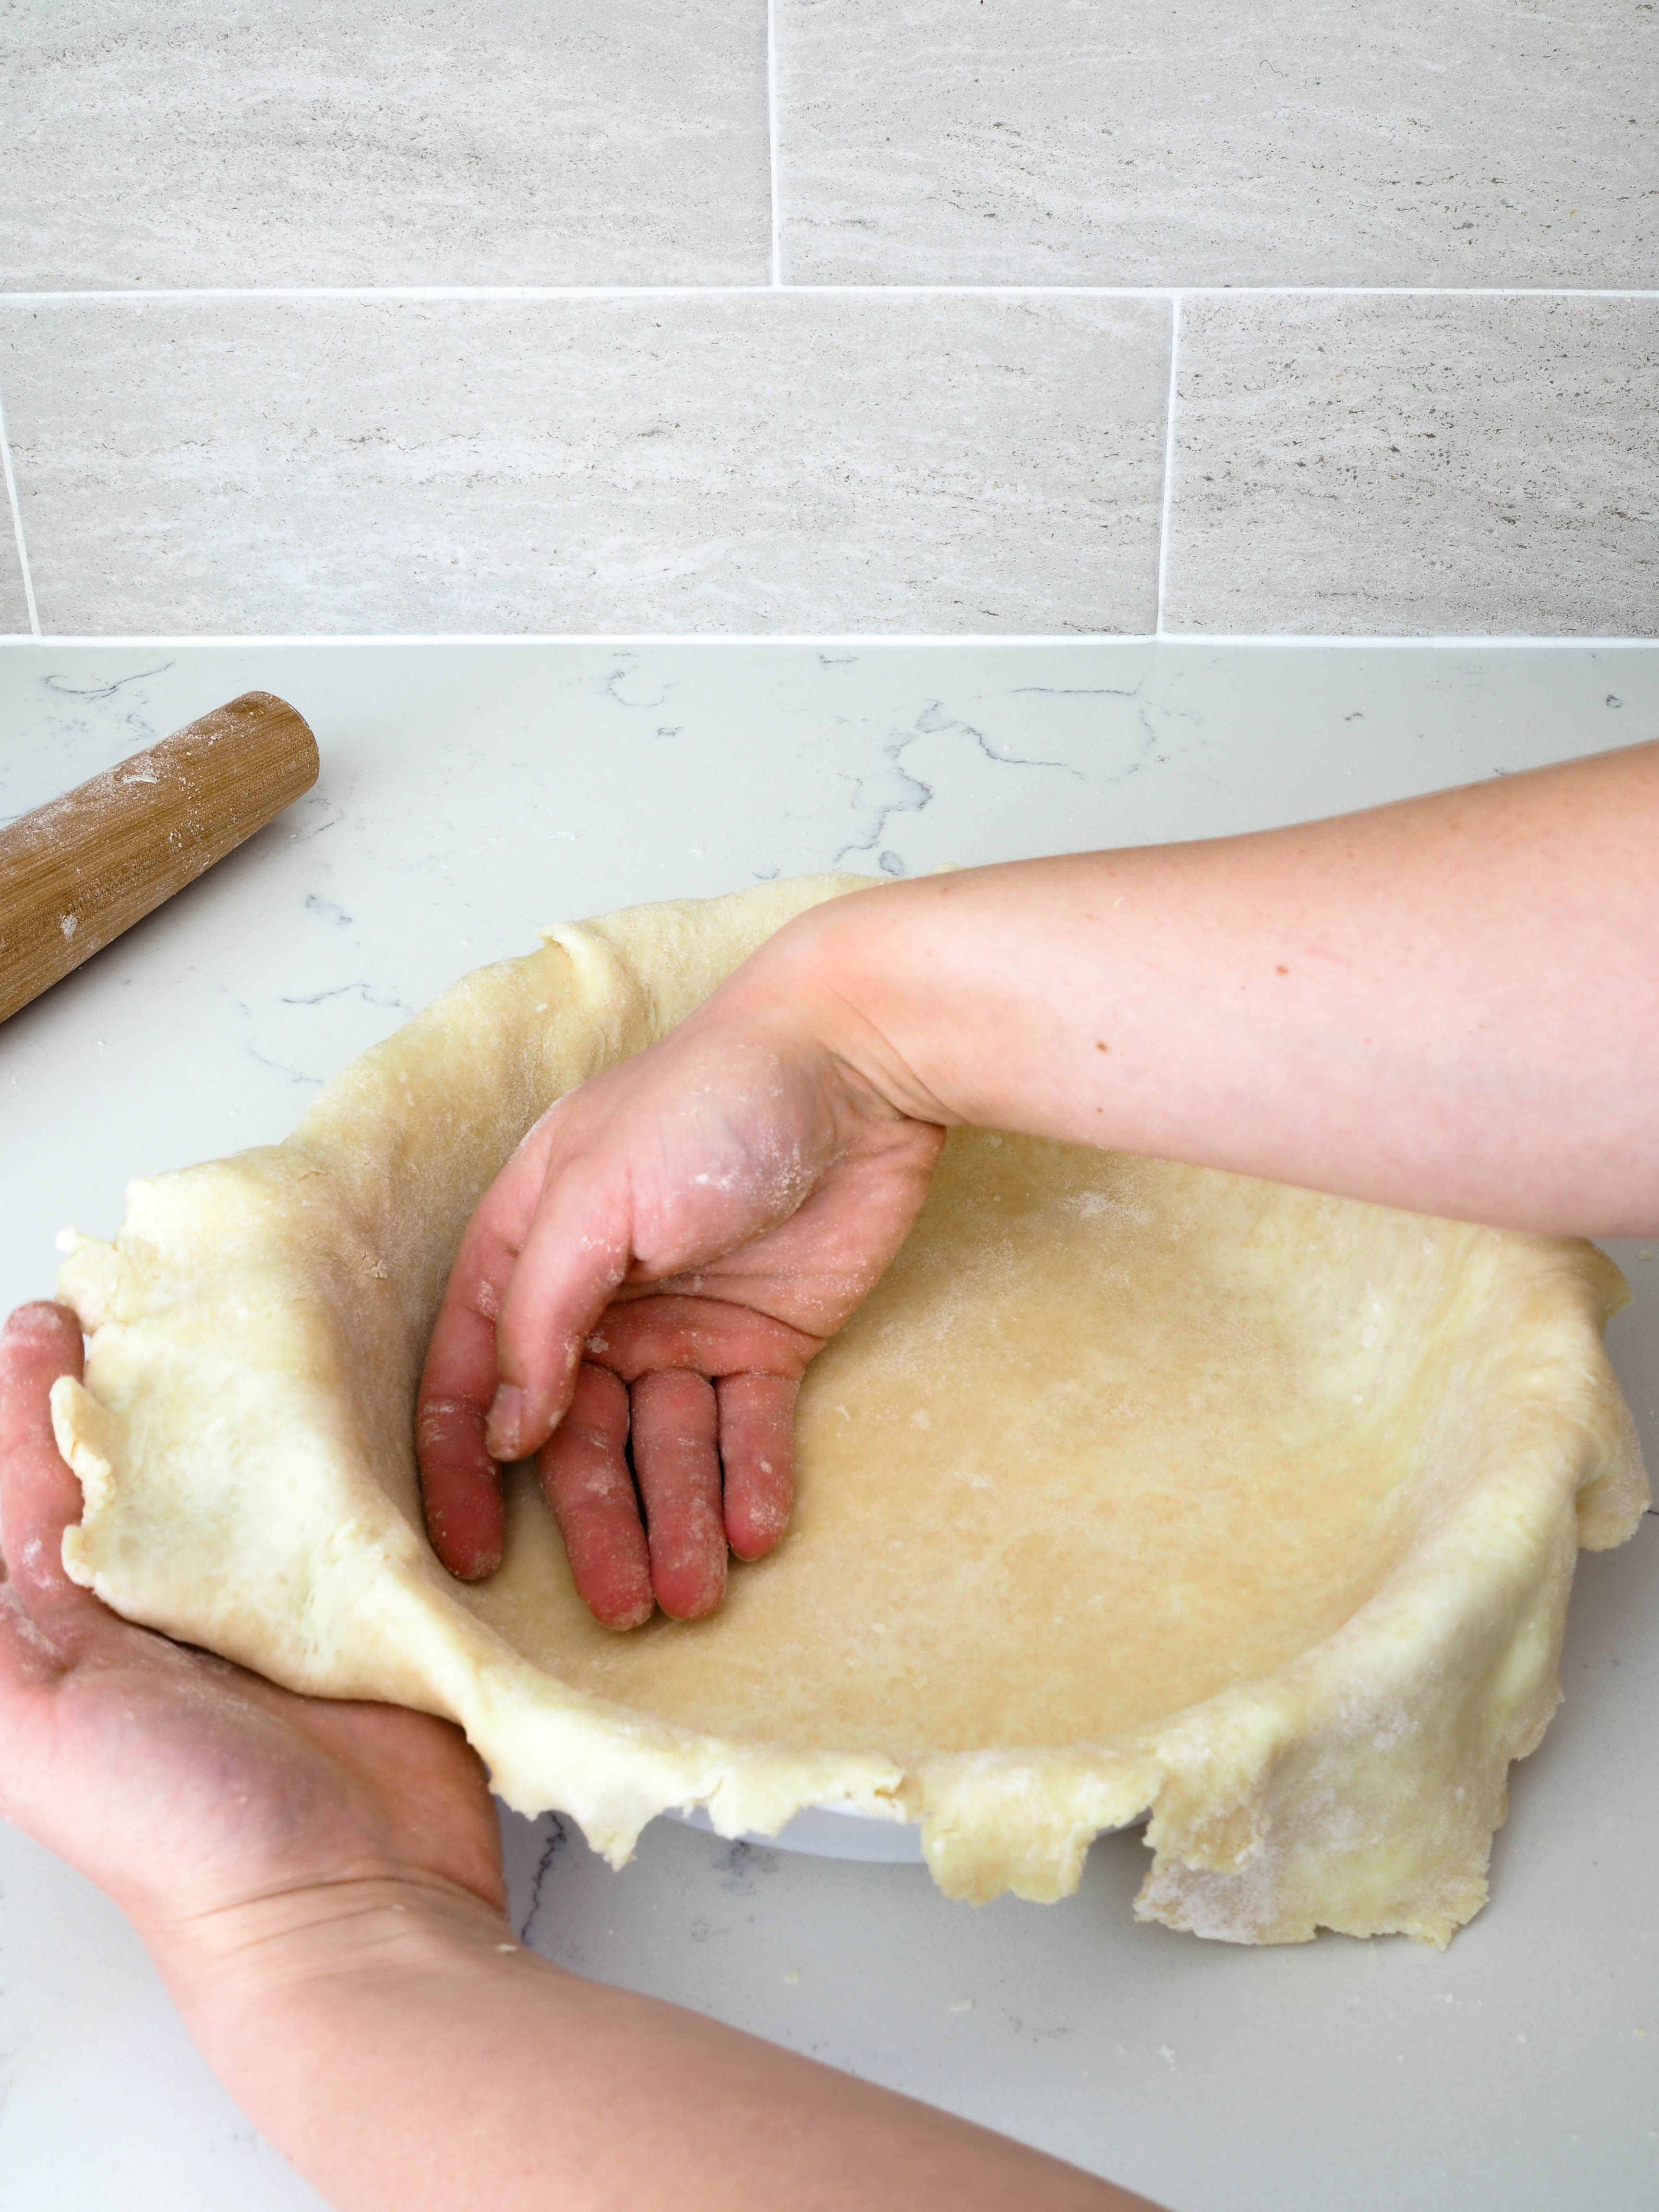 Two hands help gently guide the pie crust into its pan.